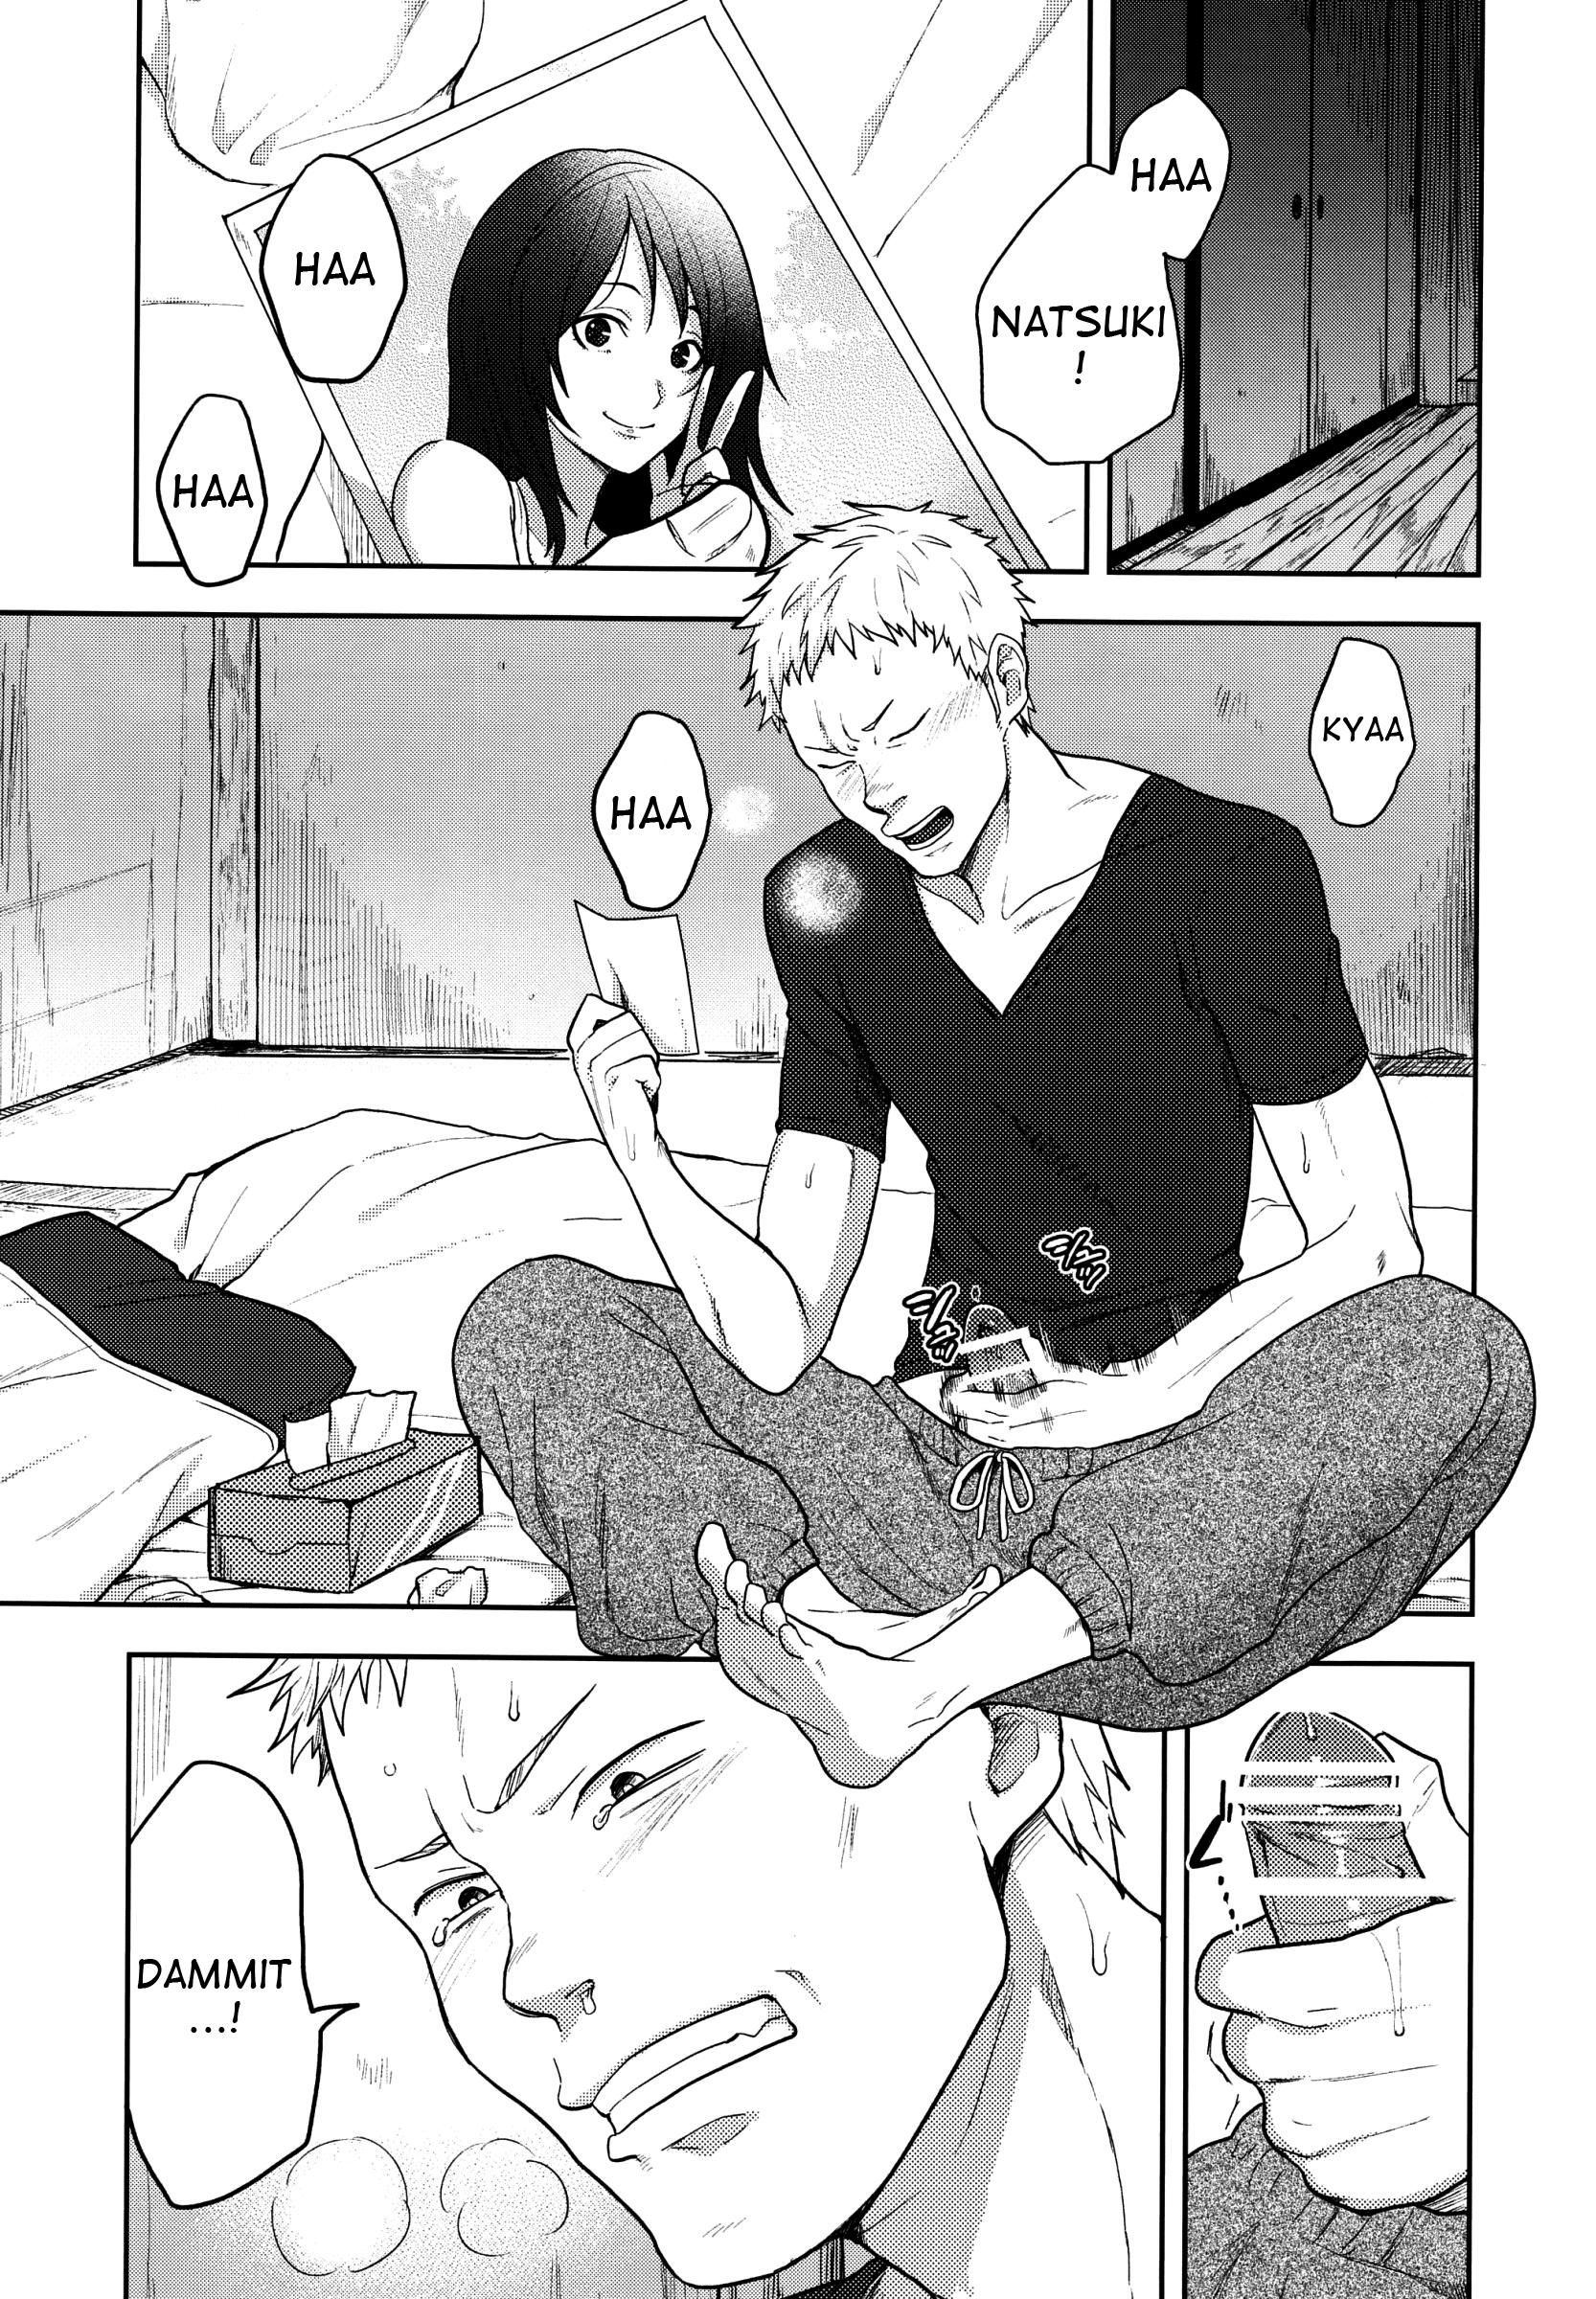 Gay Friend DKY - Summer wars Small - Page 3